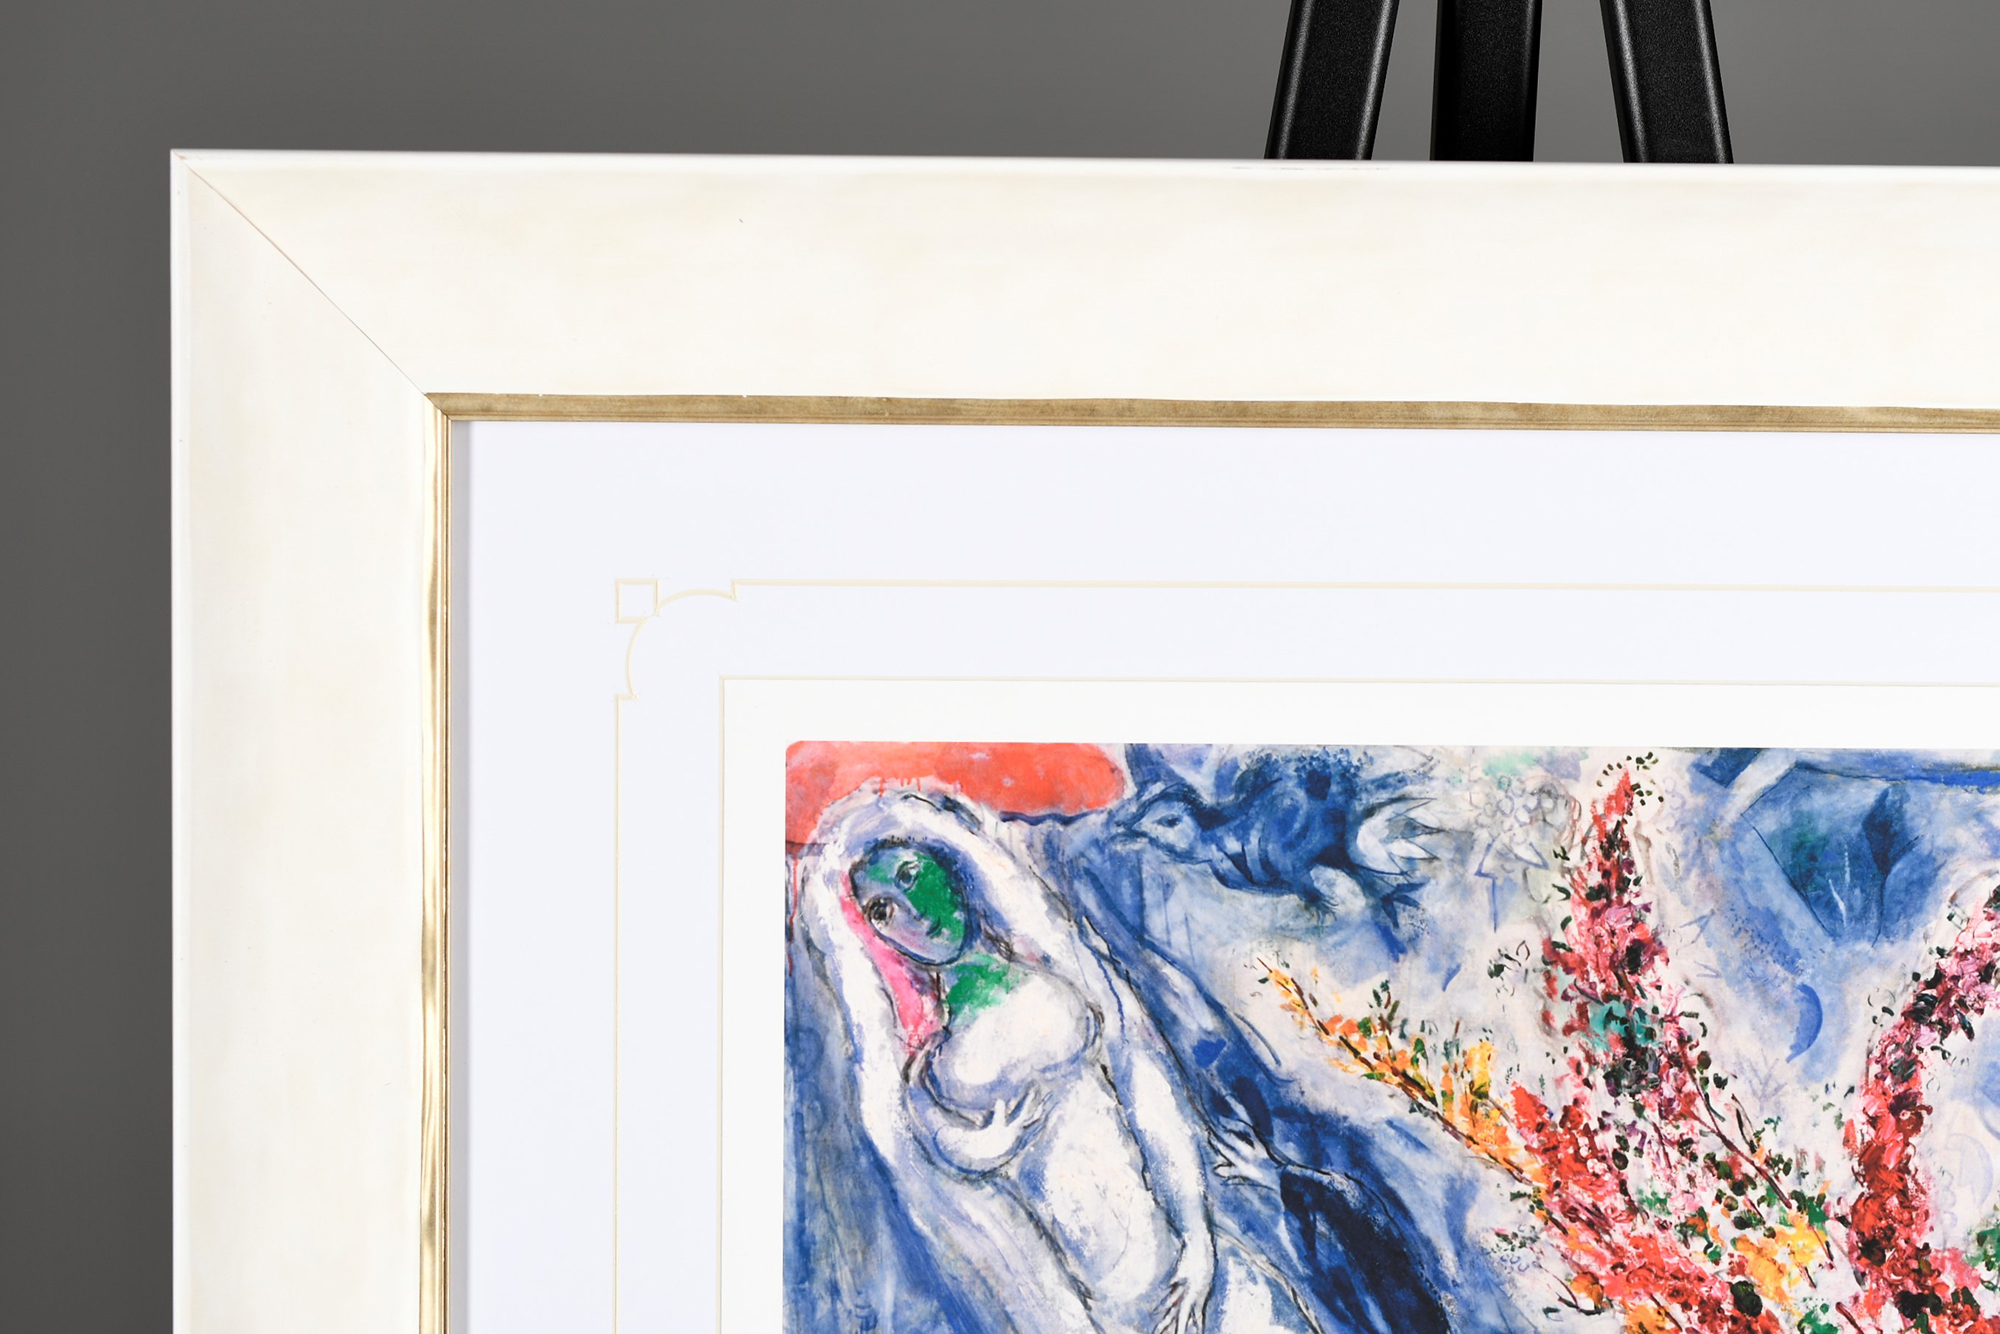 Limited Edition Marc Chagall ""Flowers Over Paris"" One of only 50 Worldwide - Image 5 of 10